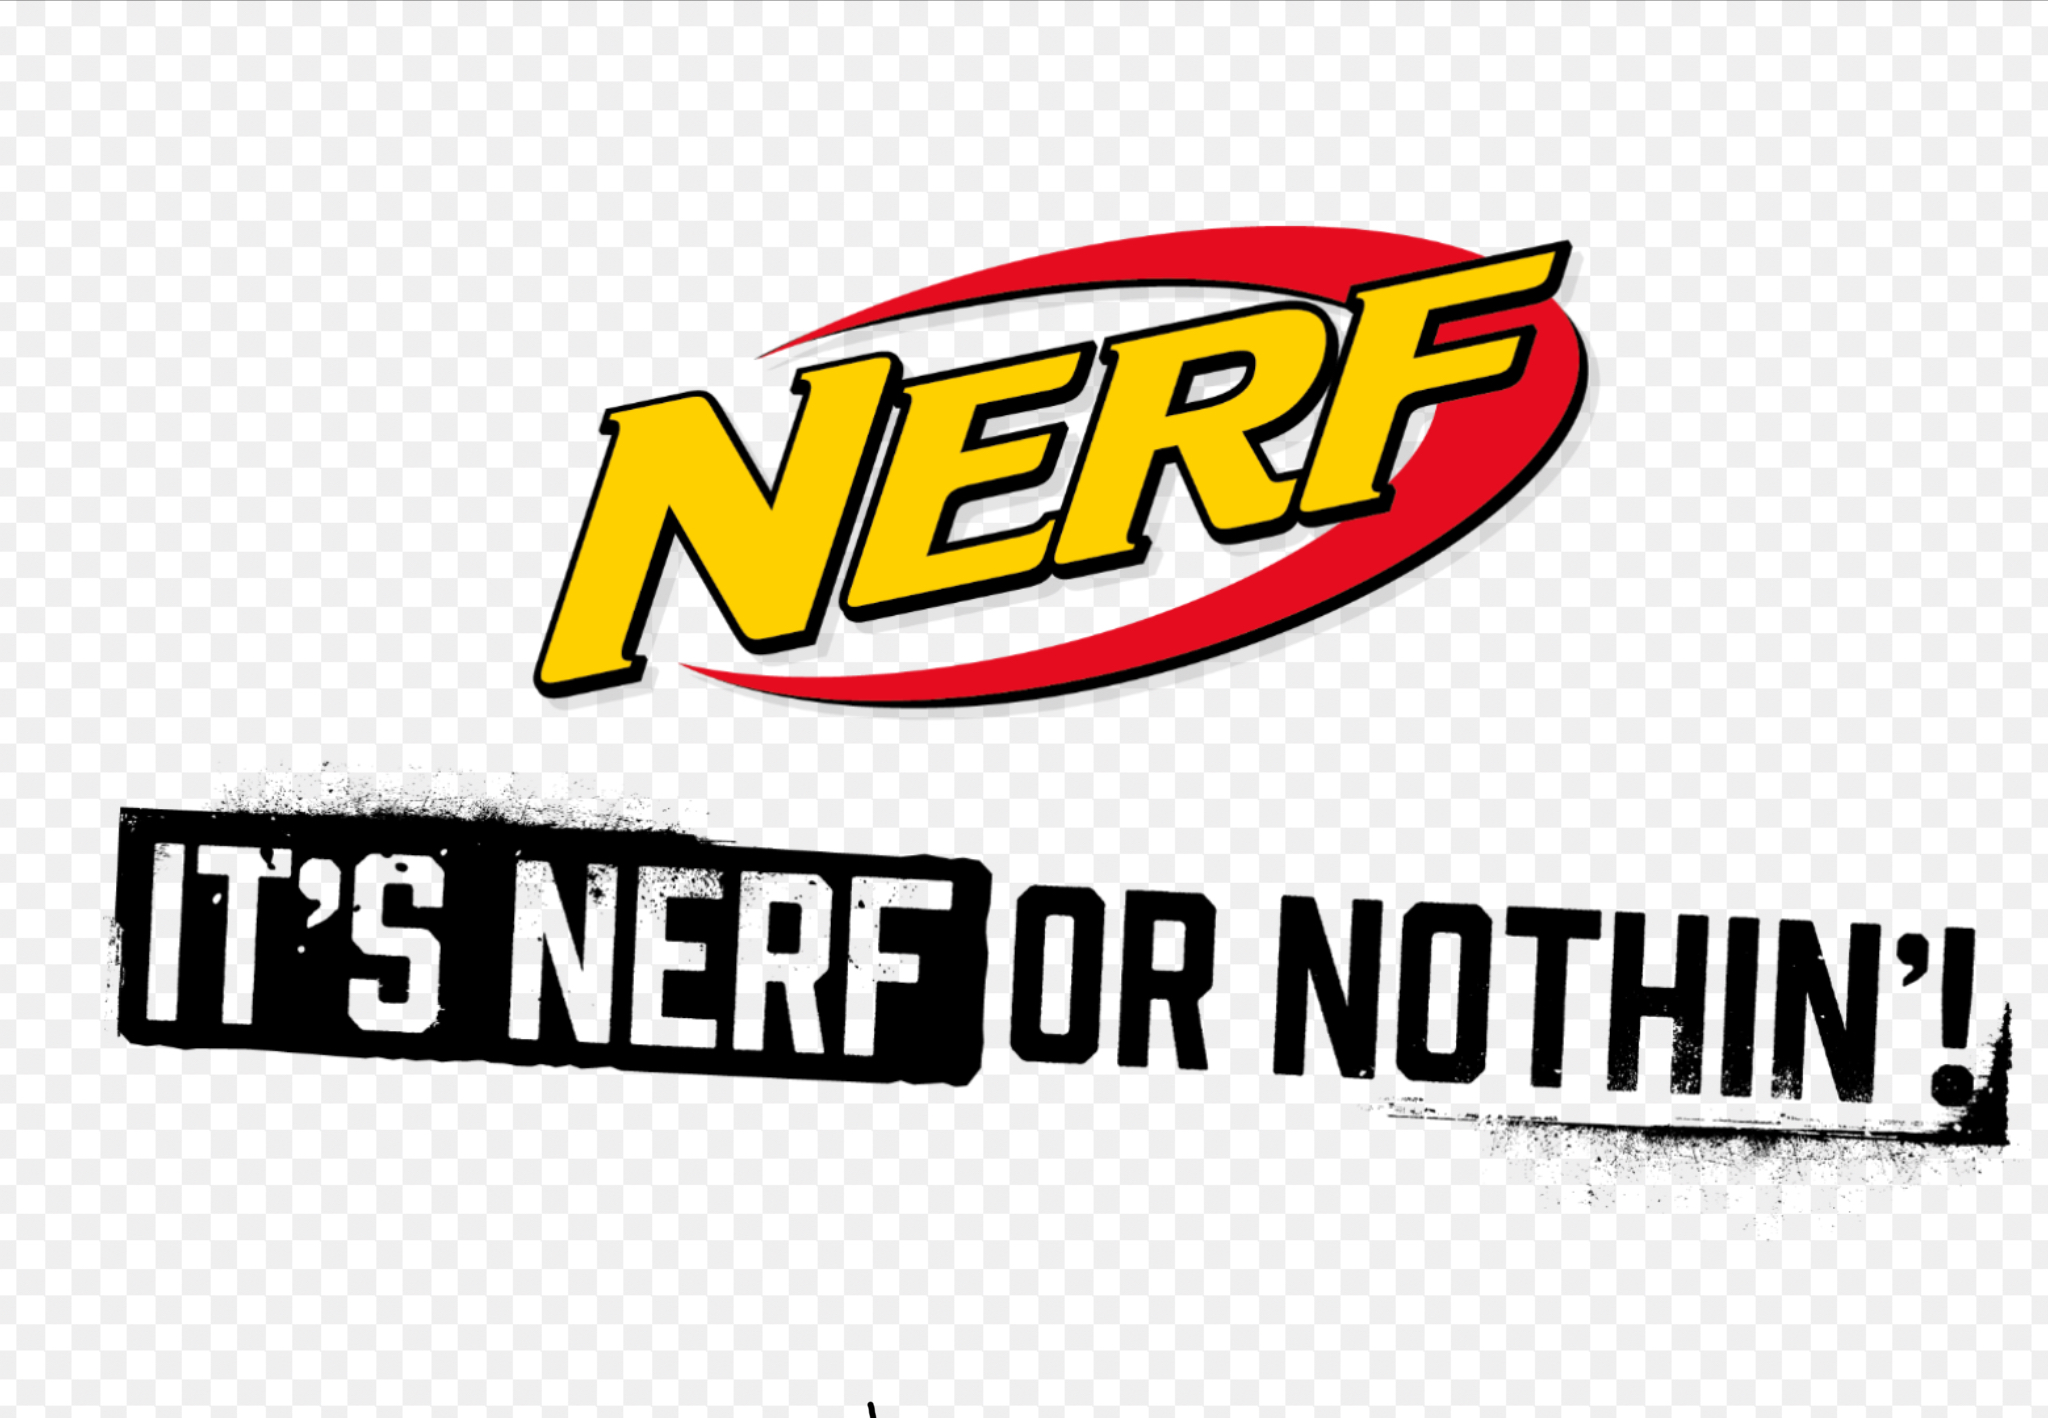 High Quality Nerf or nothin’ Blank Meme Template